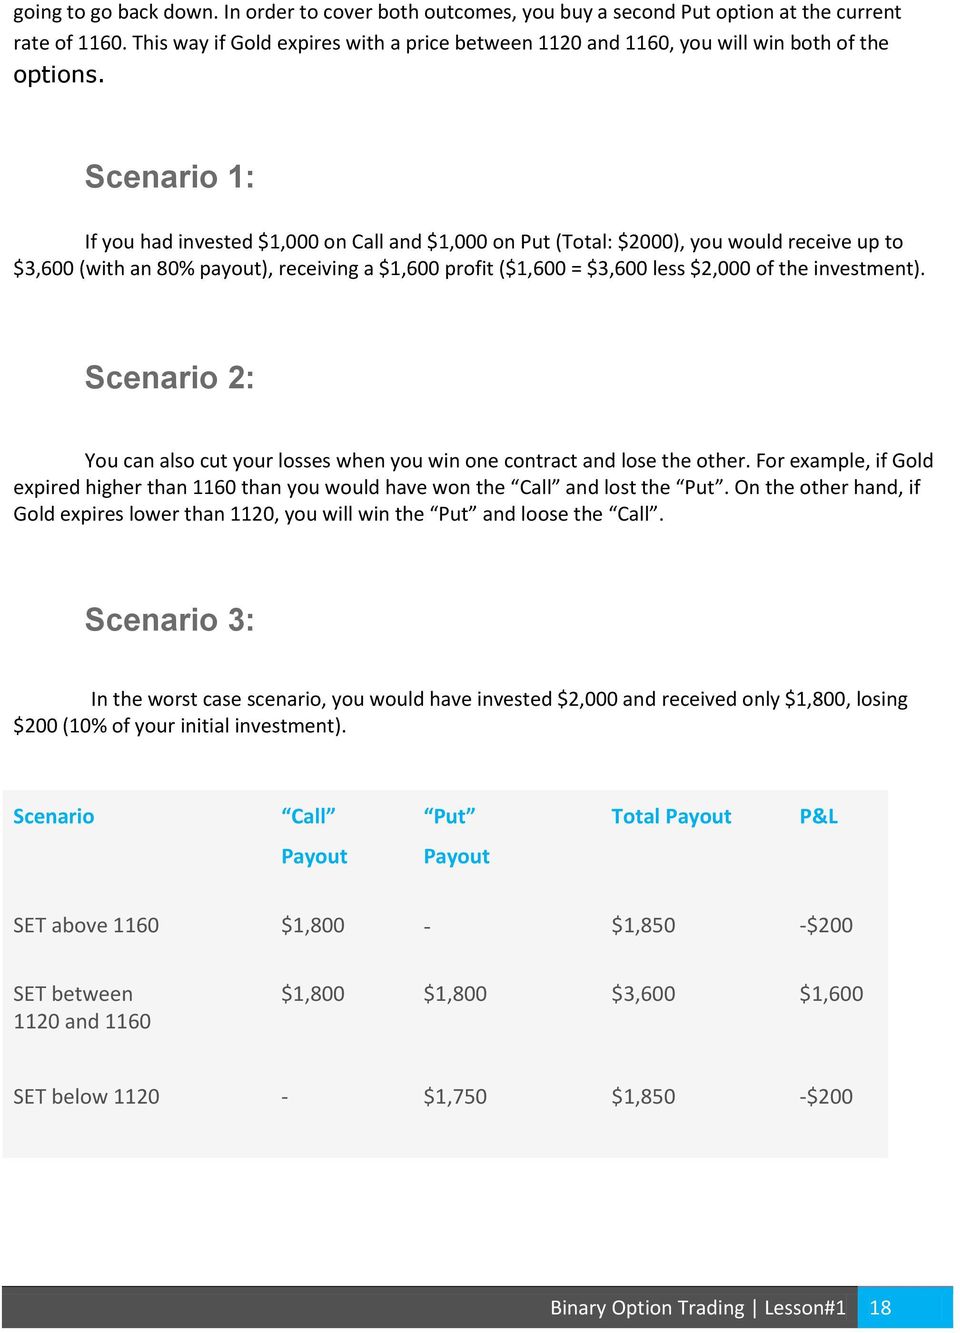 Scenario 1: If you had invested $1,000 on Call and $1,000 on Put (Total: $2000), you would receive up to $3,600 (with an 80% payout), receiving a $1,600 profit ($1,600 = $3,600 less $2,000 of the